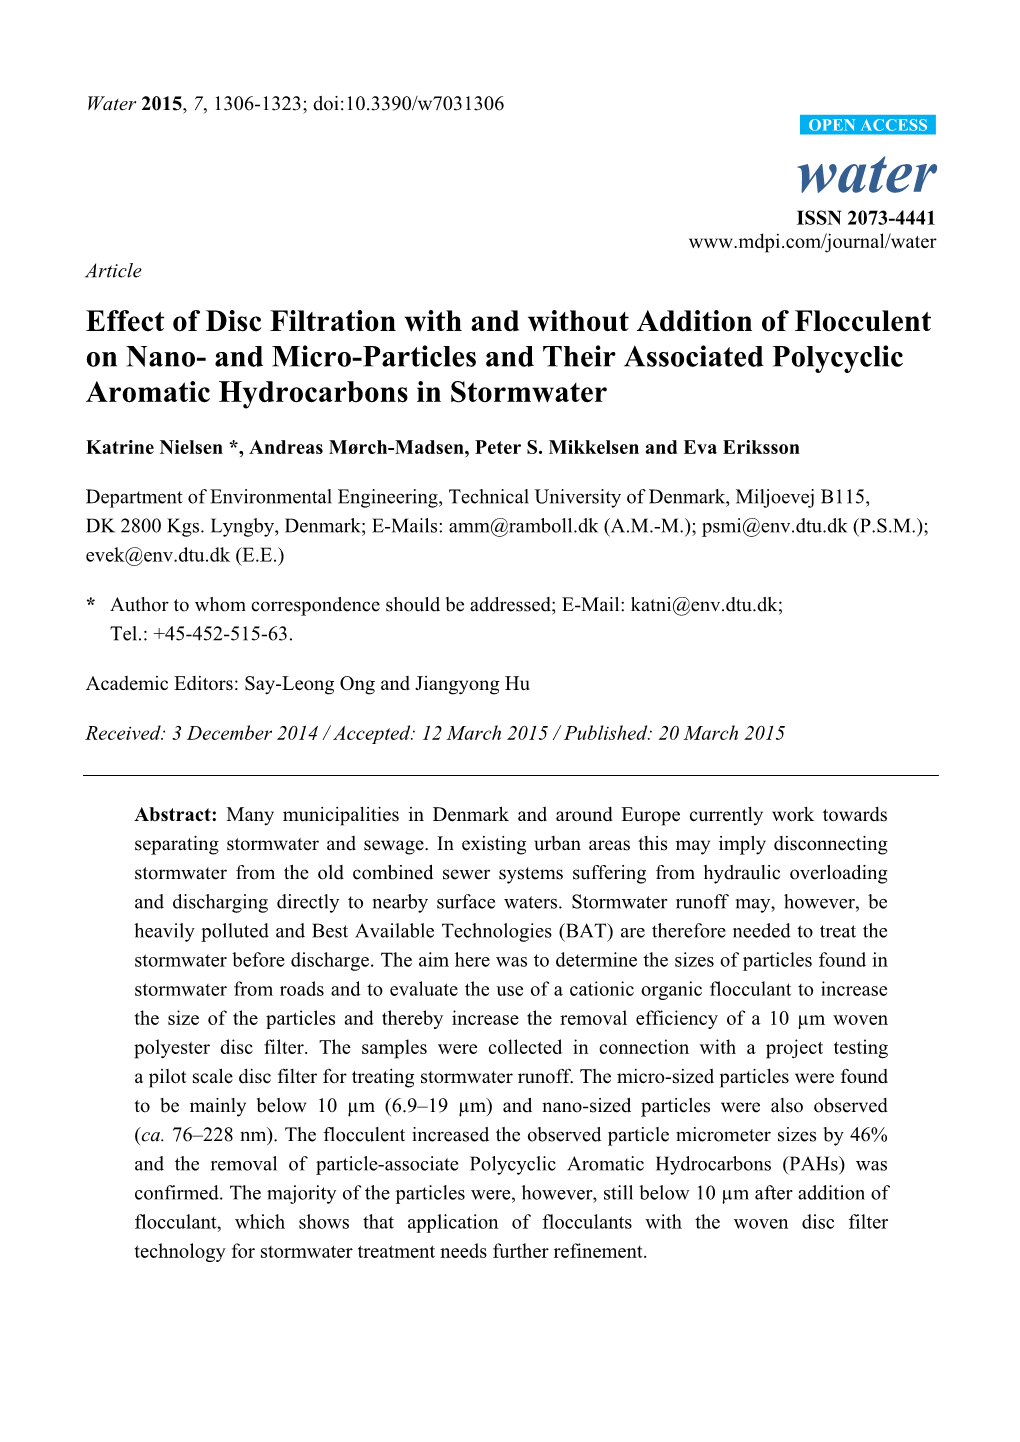 Effect of Disc Filtration with and Without Addition of Flocculent on Nano- and Micro-Particles and Their Associated Polycyclic Aromatic Hydrocarbons in Stormwater